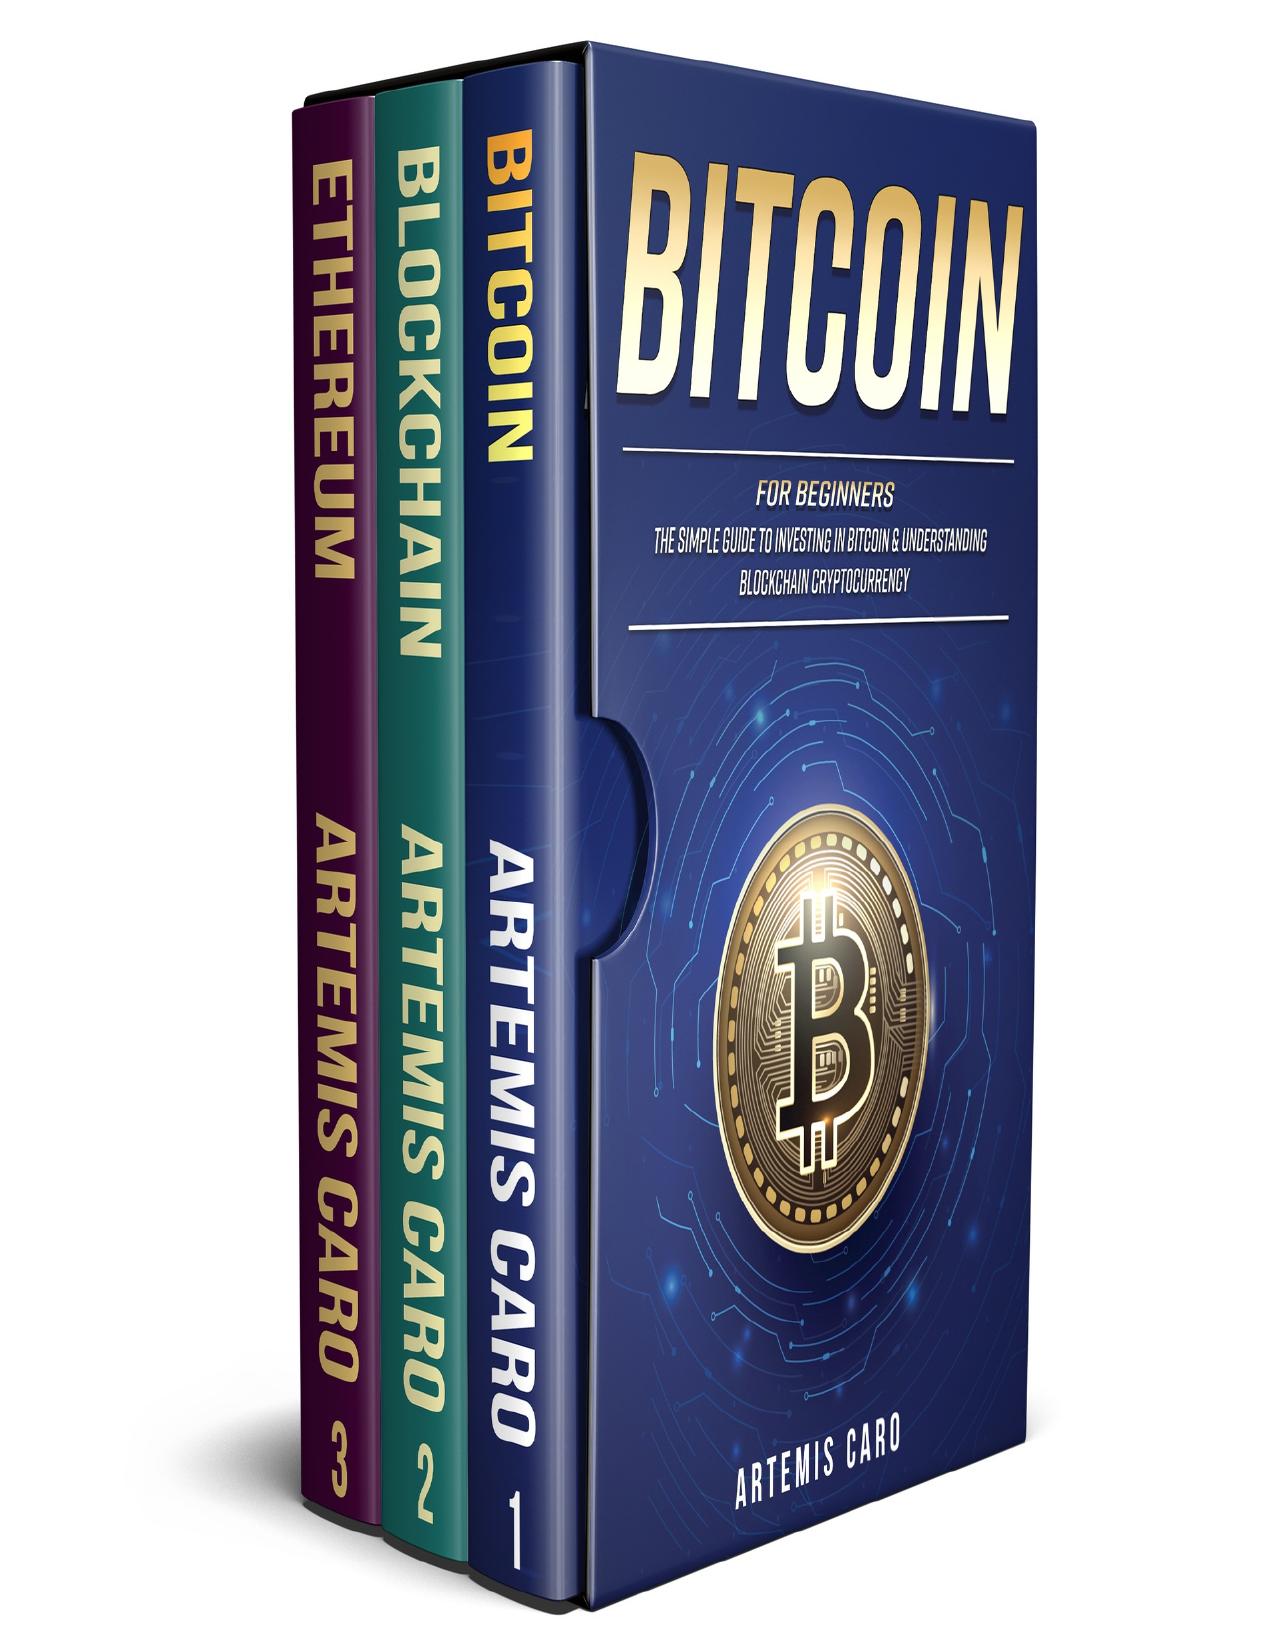 Bitcoin for Beginners: The Simple Guide to Investing in Bitcoin & Understanding Blockchain Cryptocurrency (3 in 1 Box Set) by Caro Artemis